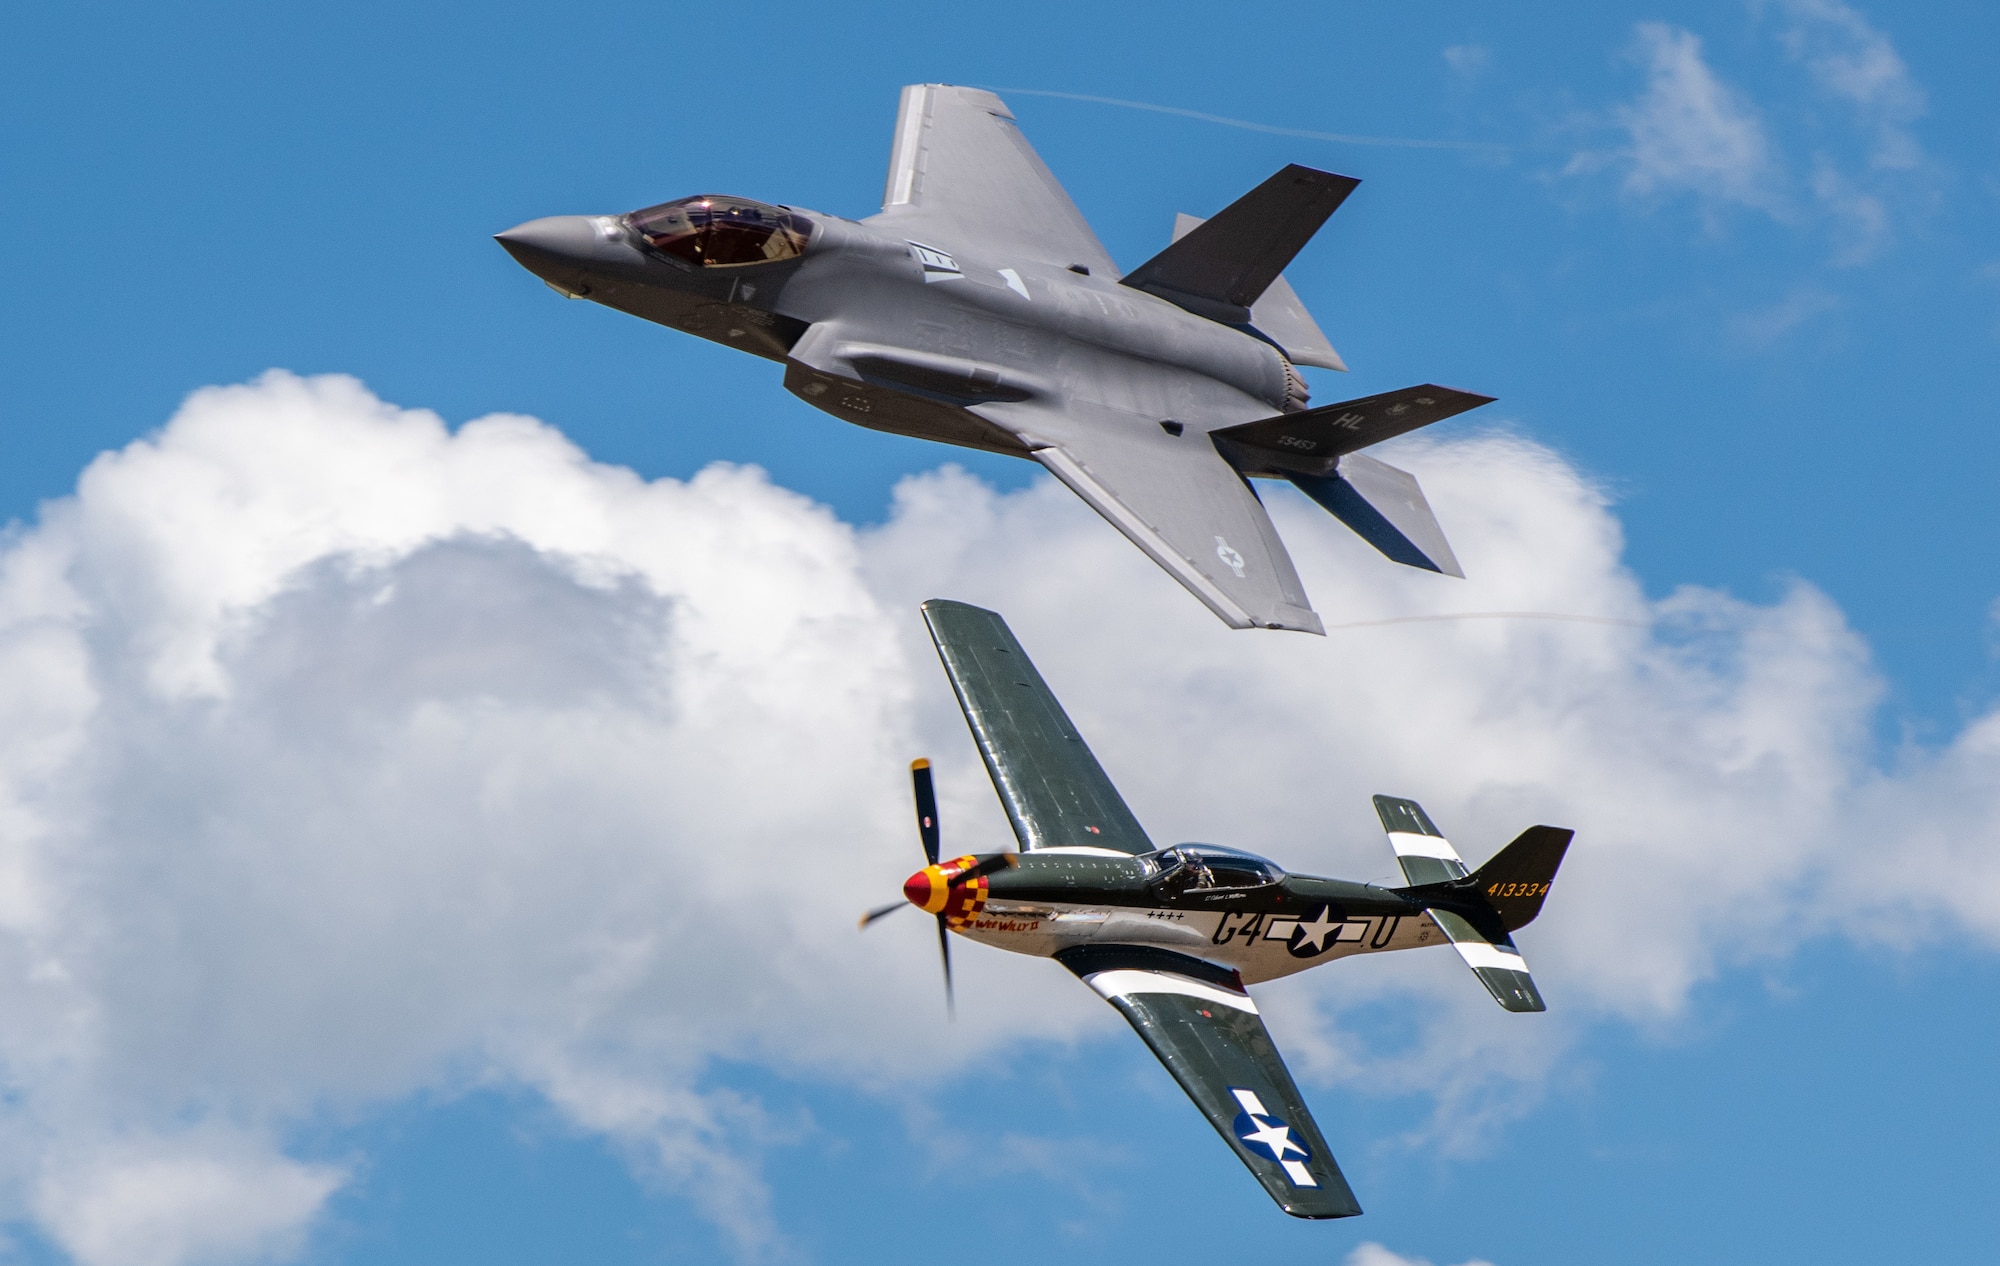 AN F-35 and an Older P-51 mustang flying in tandum